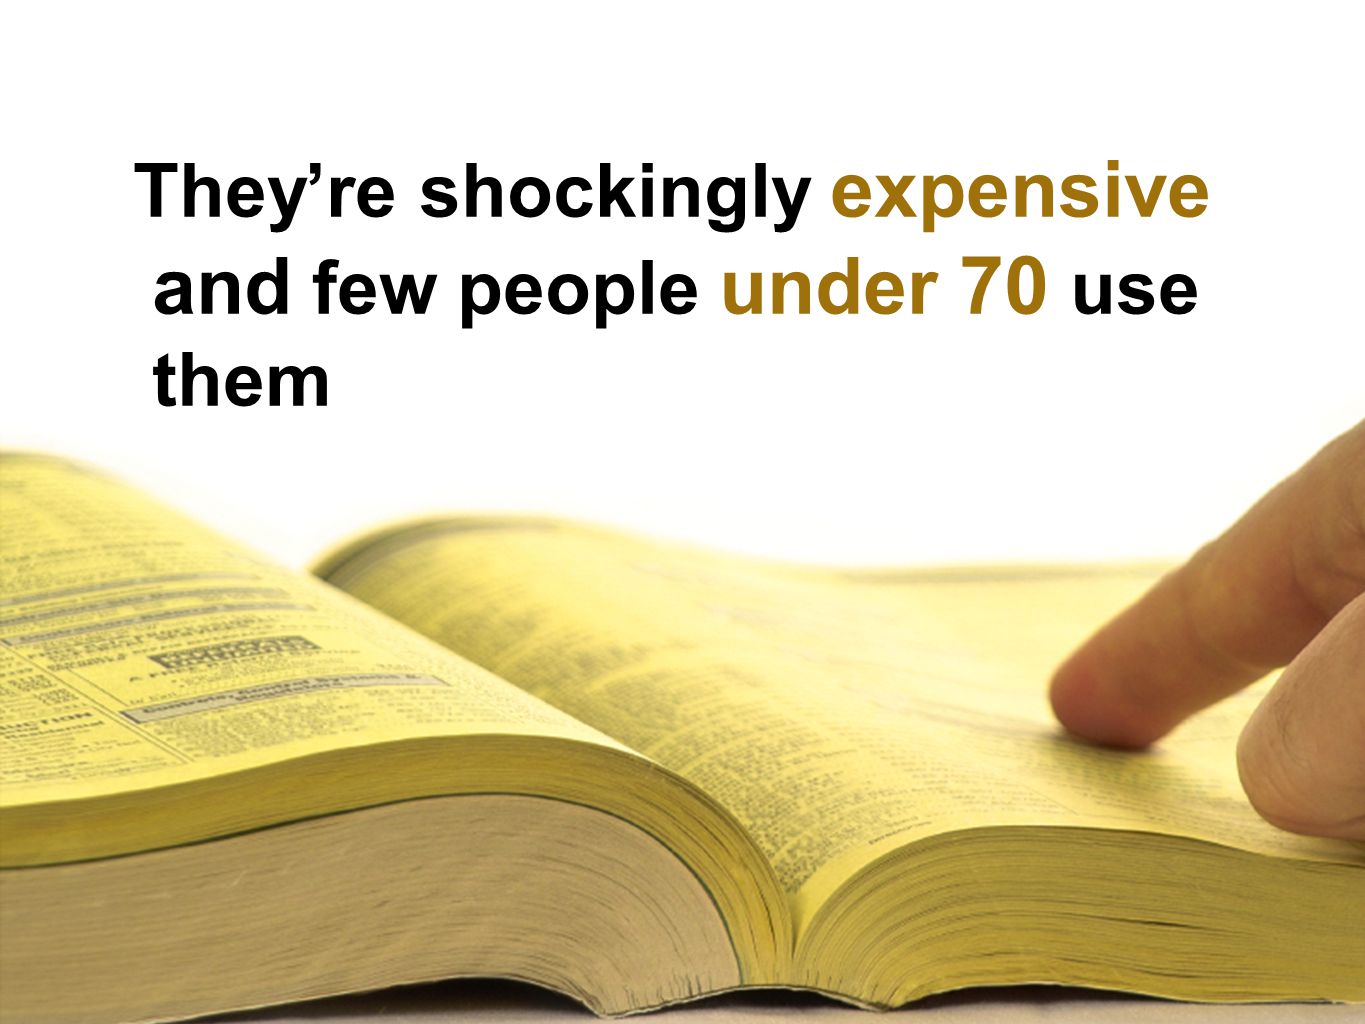 Theyre shockingly expensive and few people under 70 use them